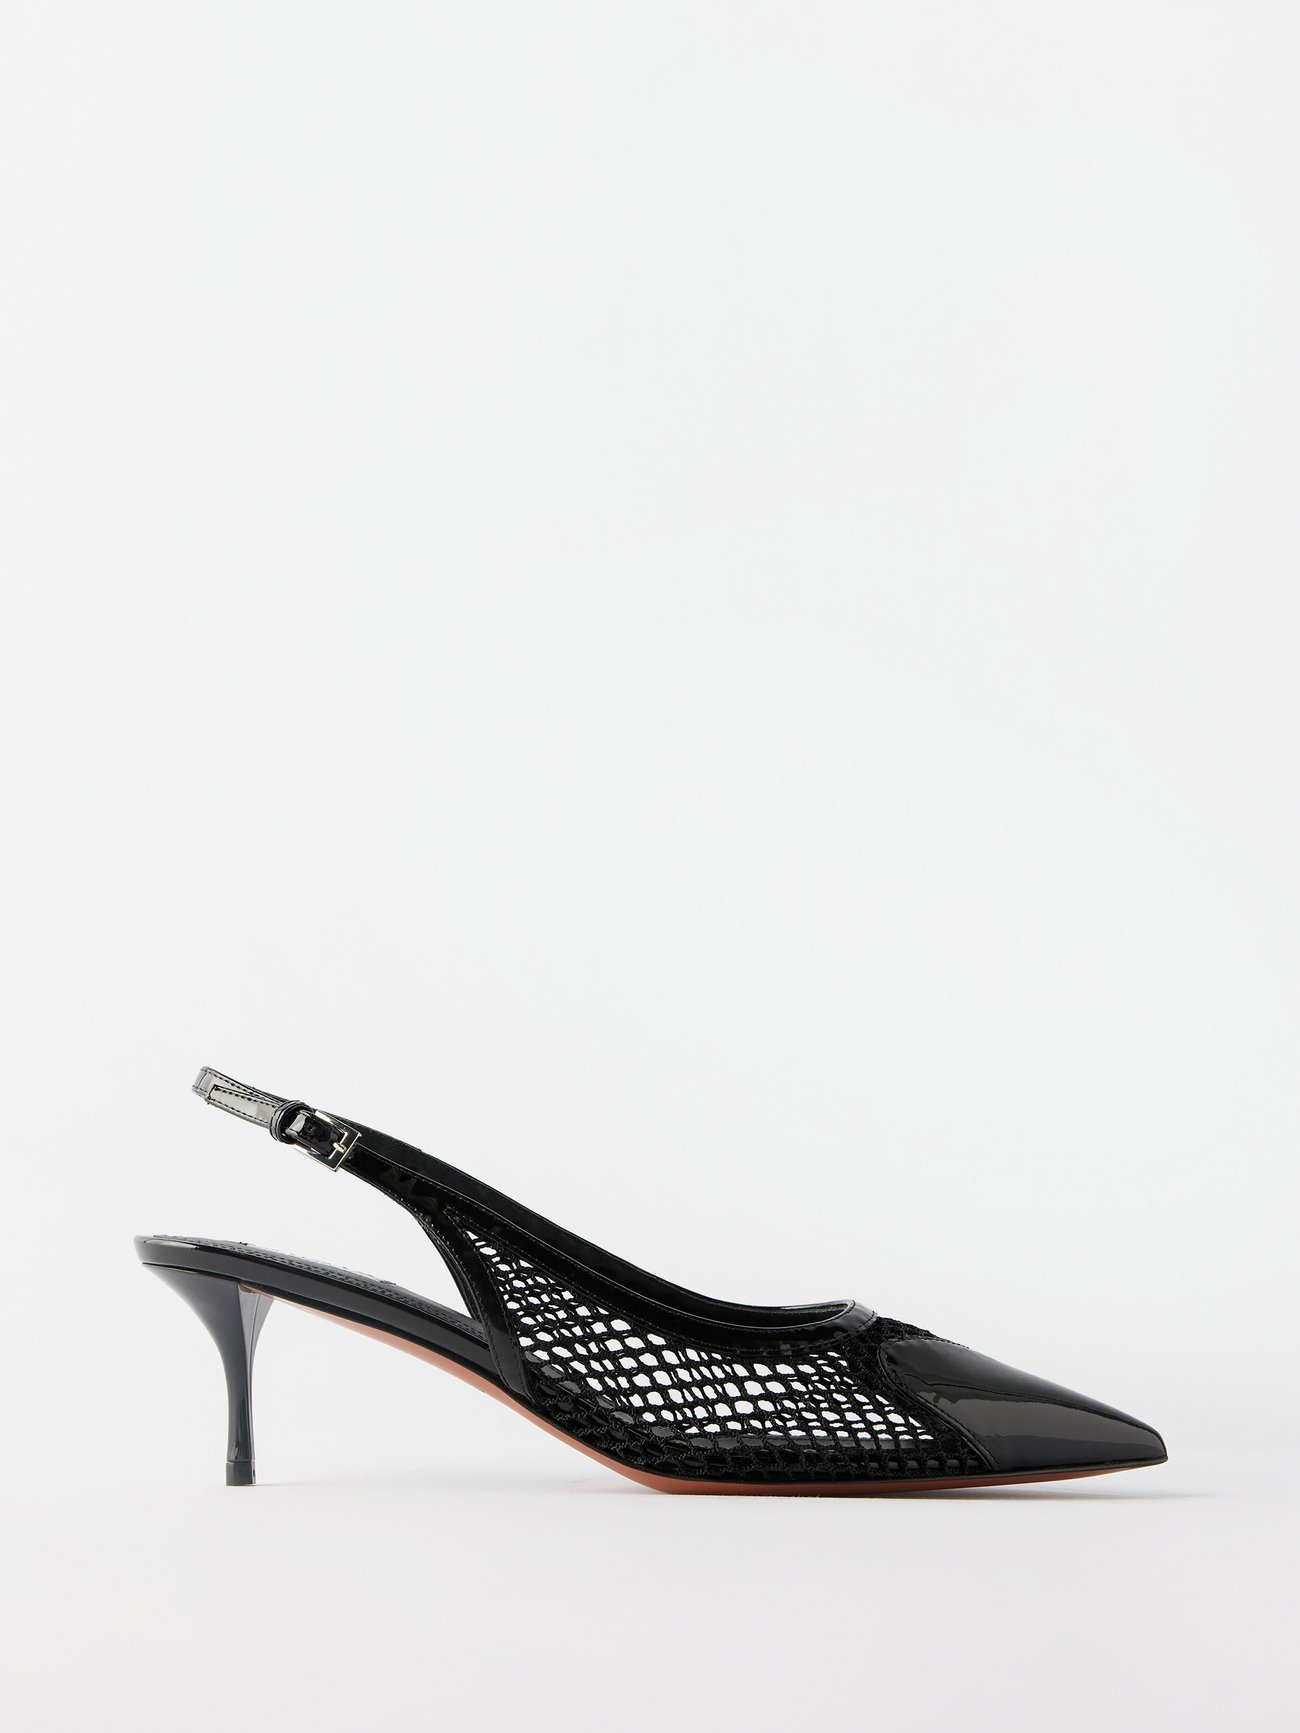 Tap into ALAÏA's alluring aesthetic with these black Heart slingback pumps, expertly crafted in Italy to a mesh construction with a patent leather trim.